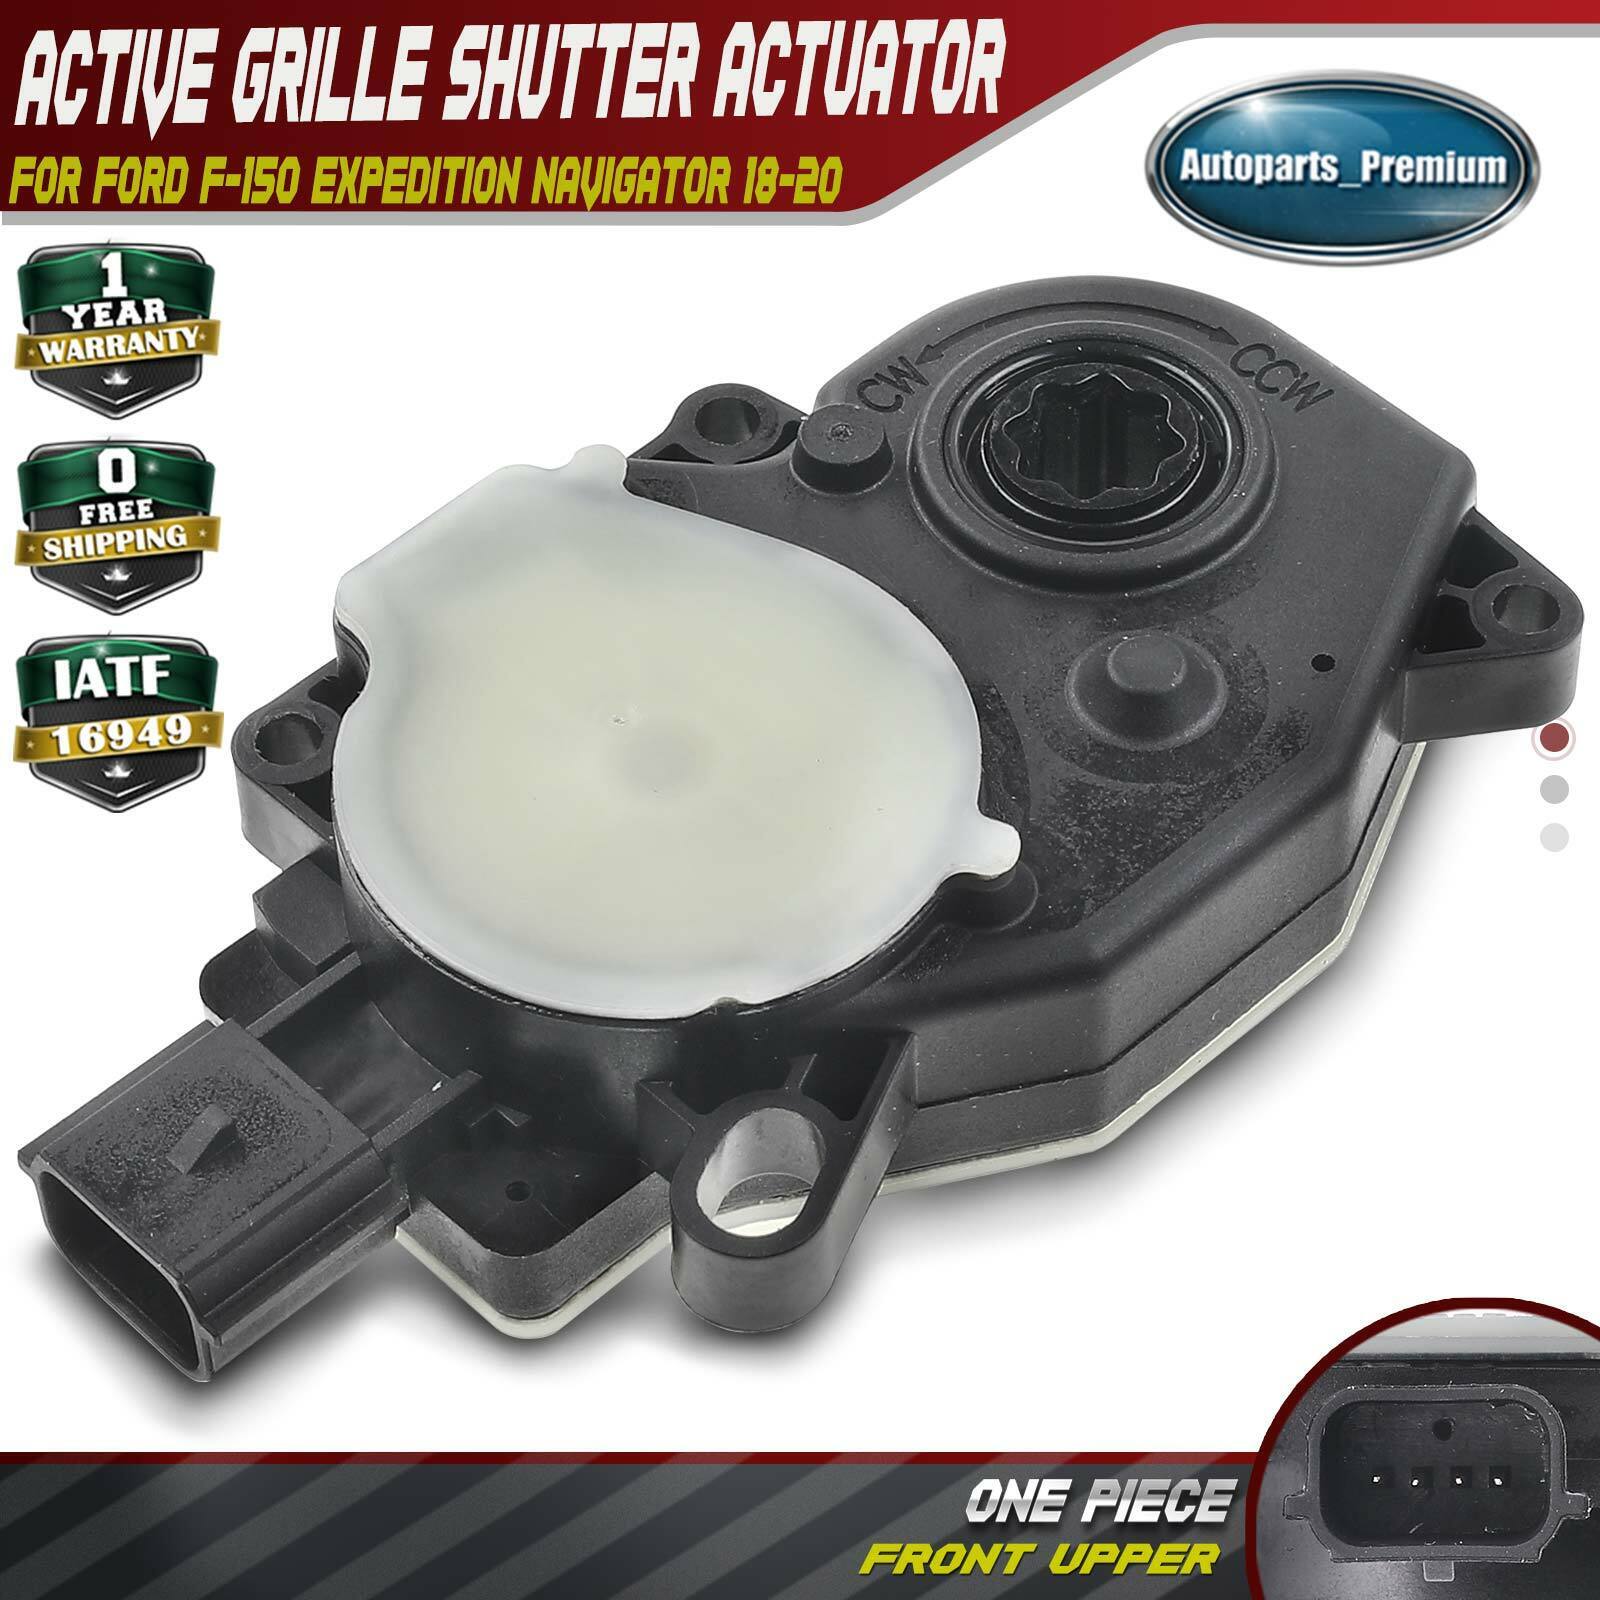 Active Grille Shutter Actuator Motor Assembly for Ford F150 Expedition Navigator